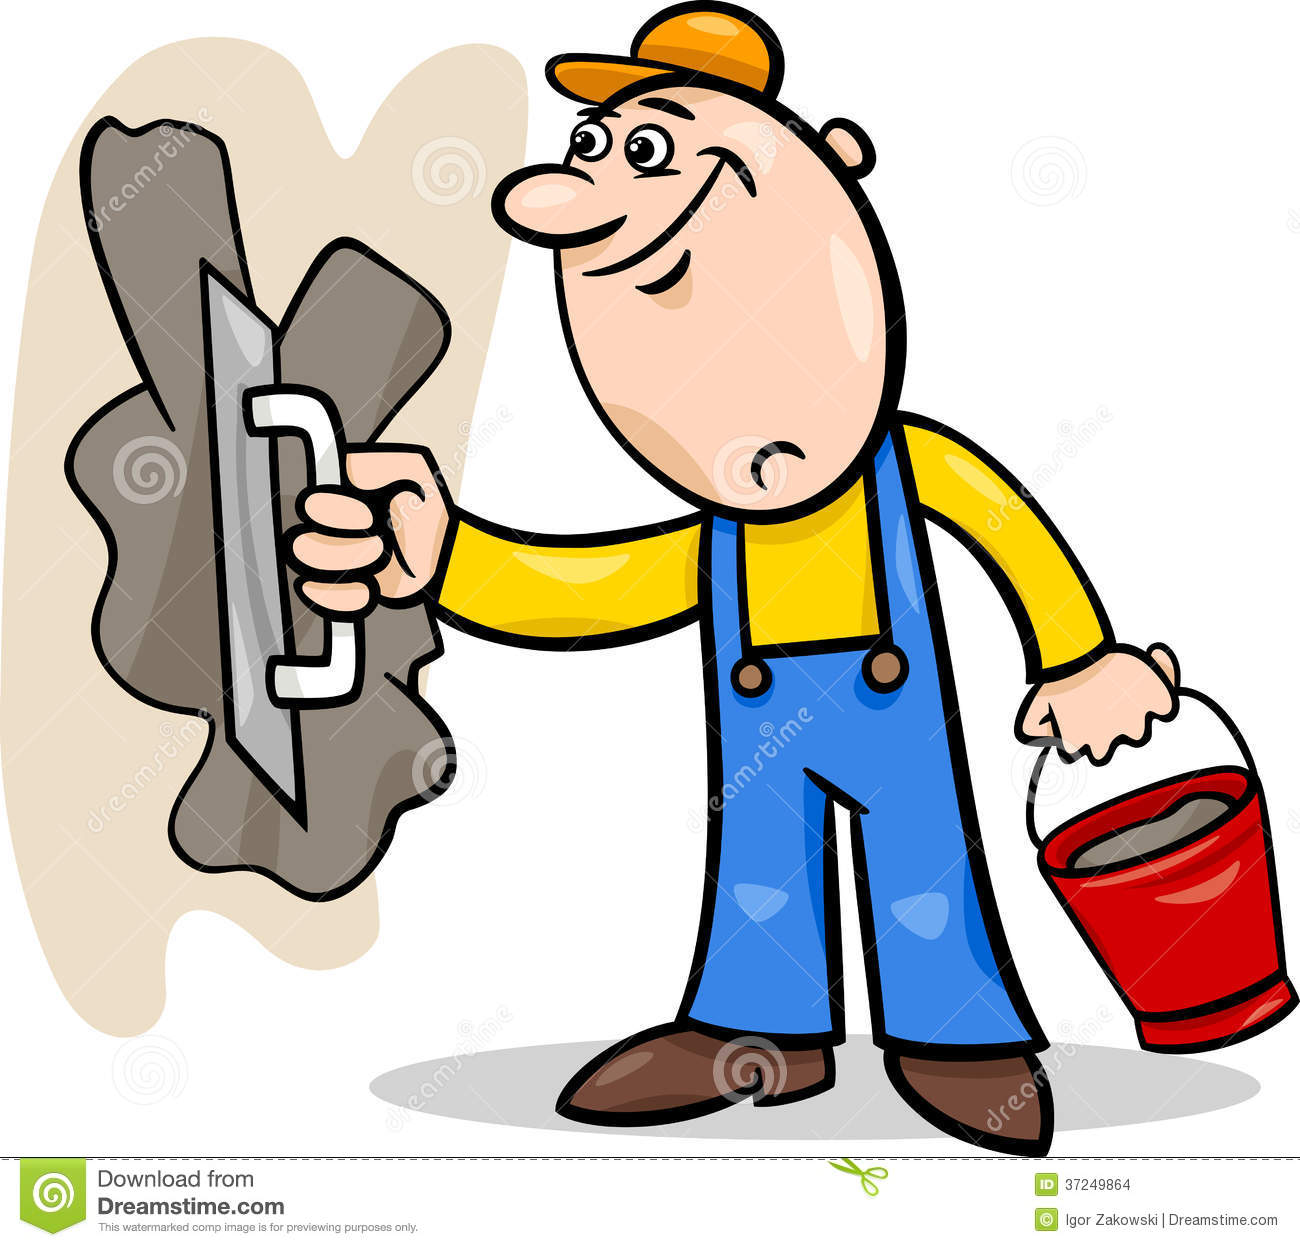 Cartoon Illustration Of Worker Or Mason With Trowel And Plaster Or